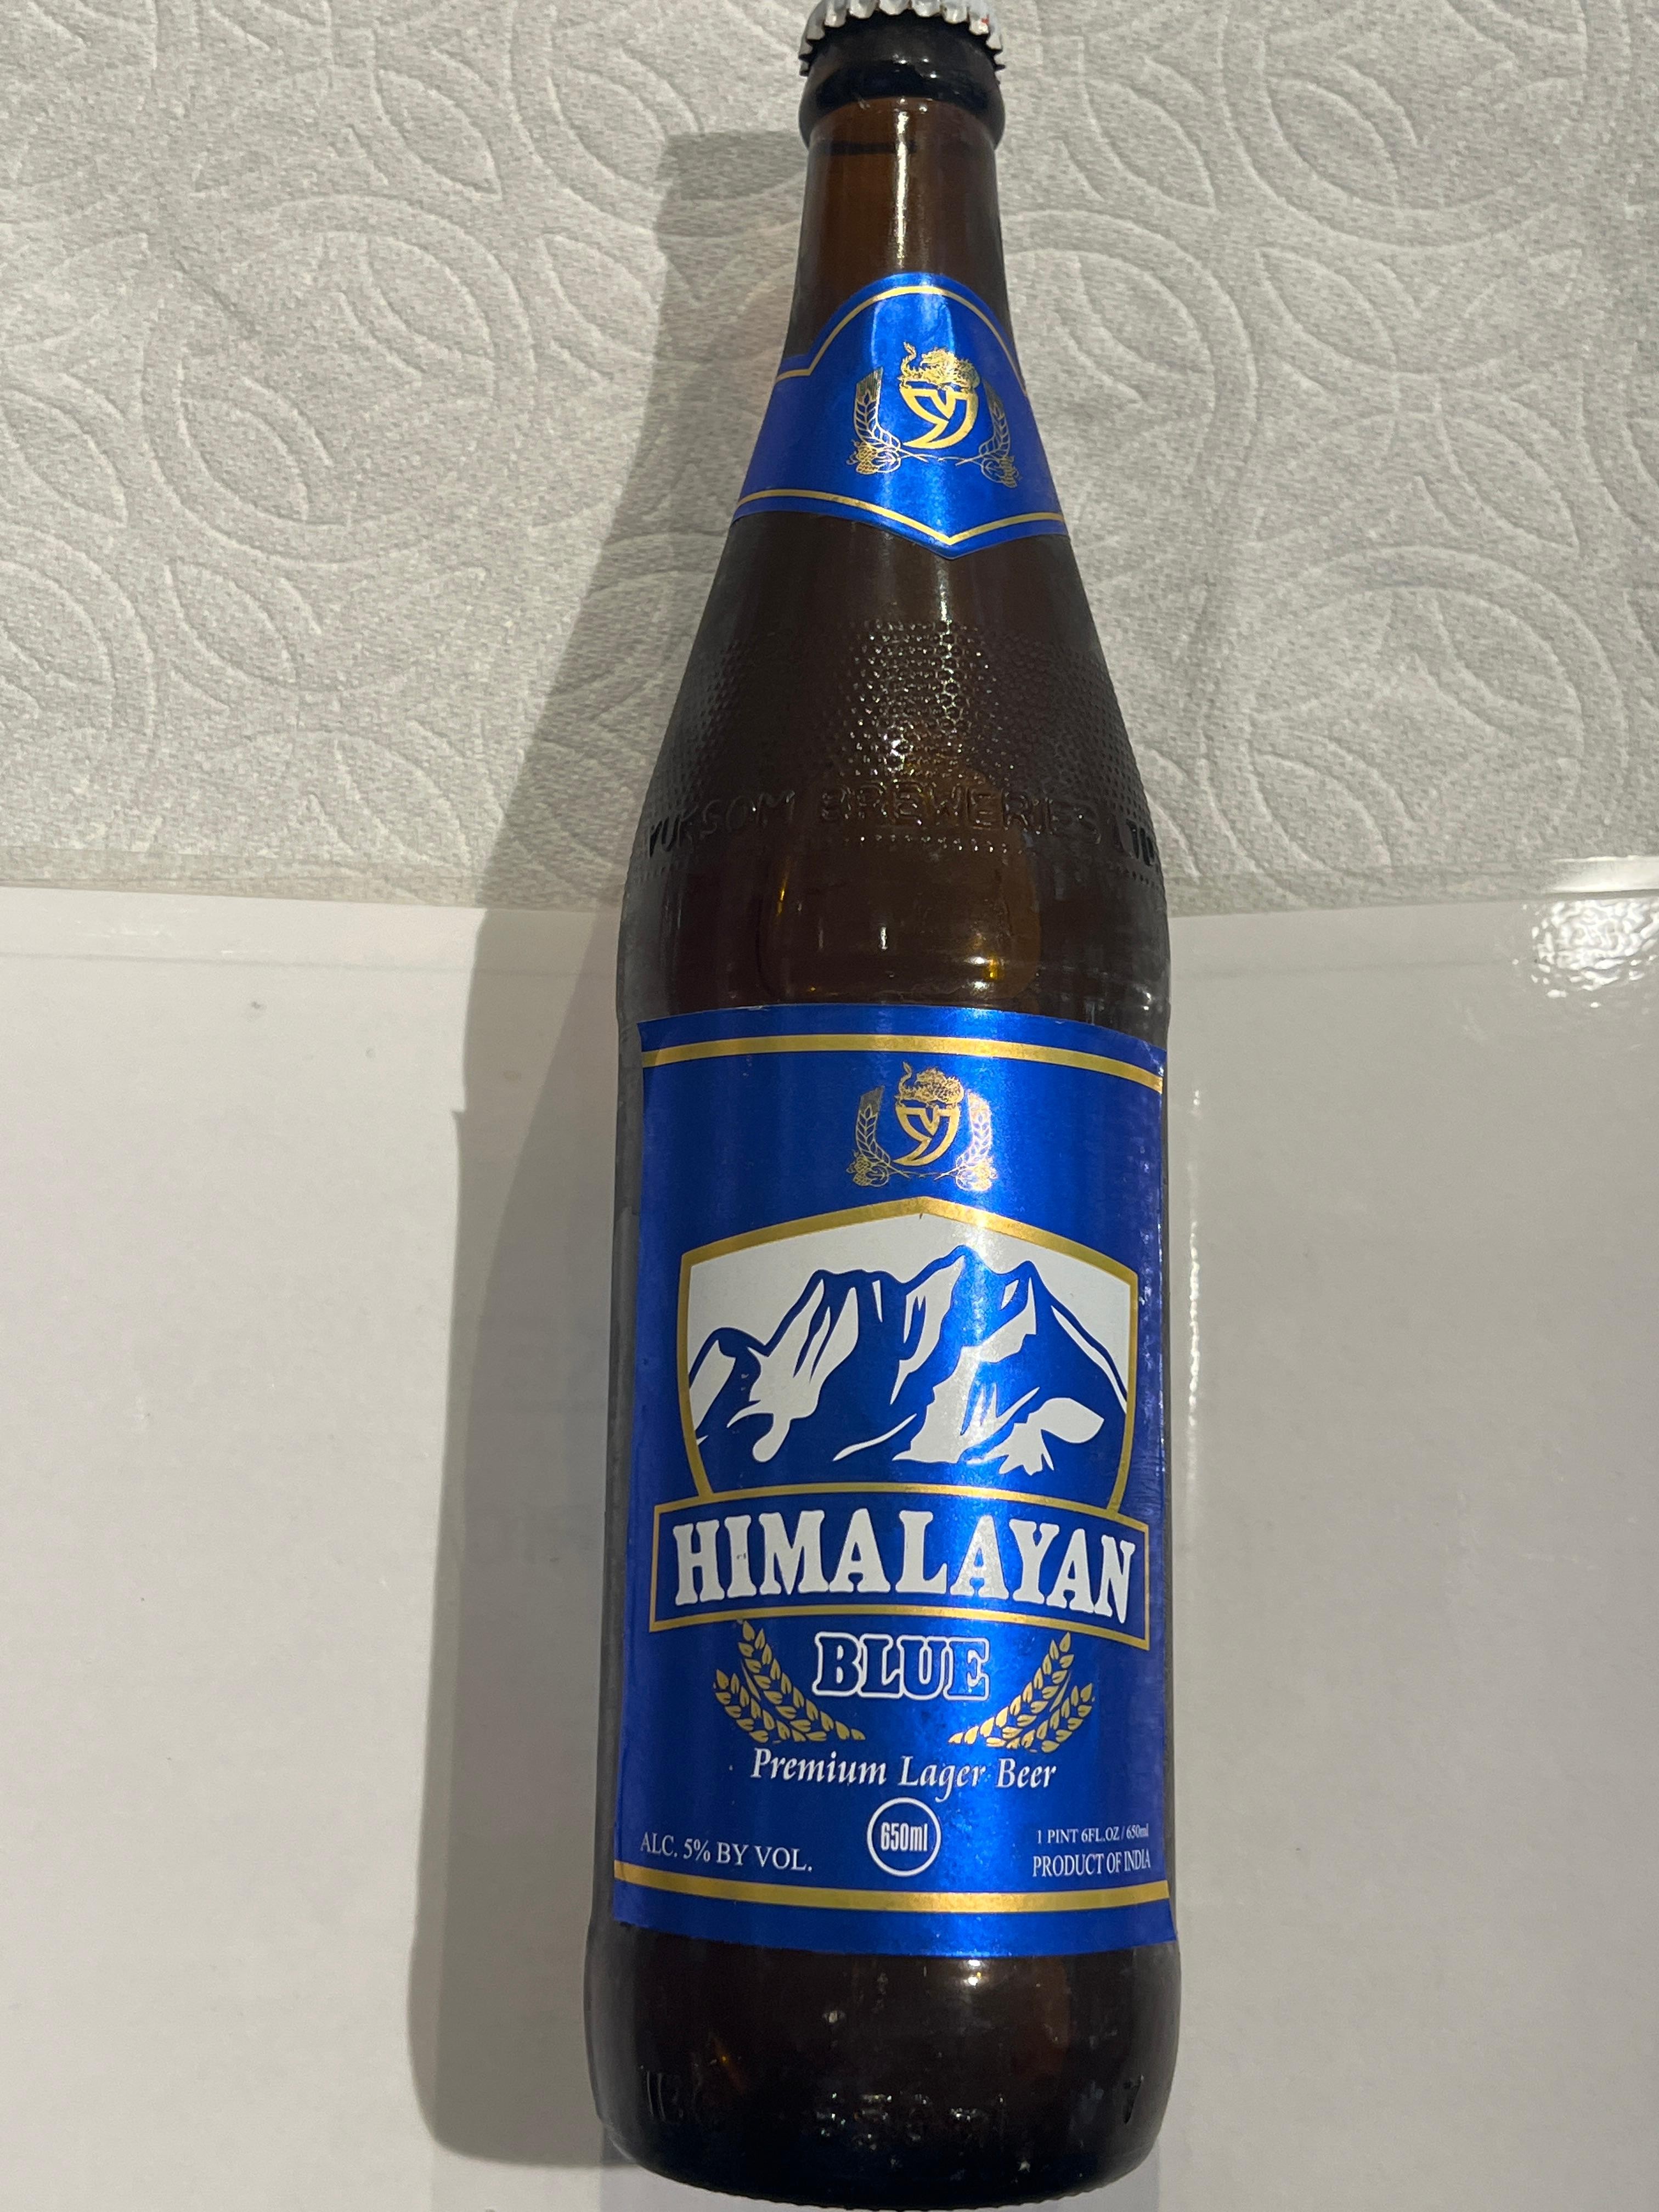 Himalayan Blue Lager Beer 5% Alc. Vol.